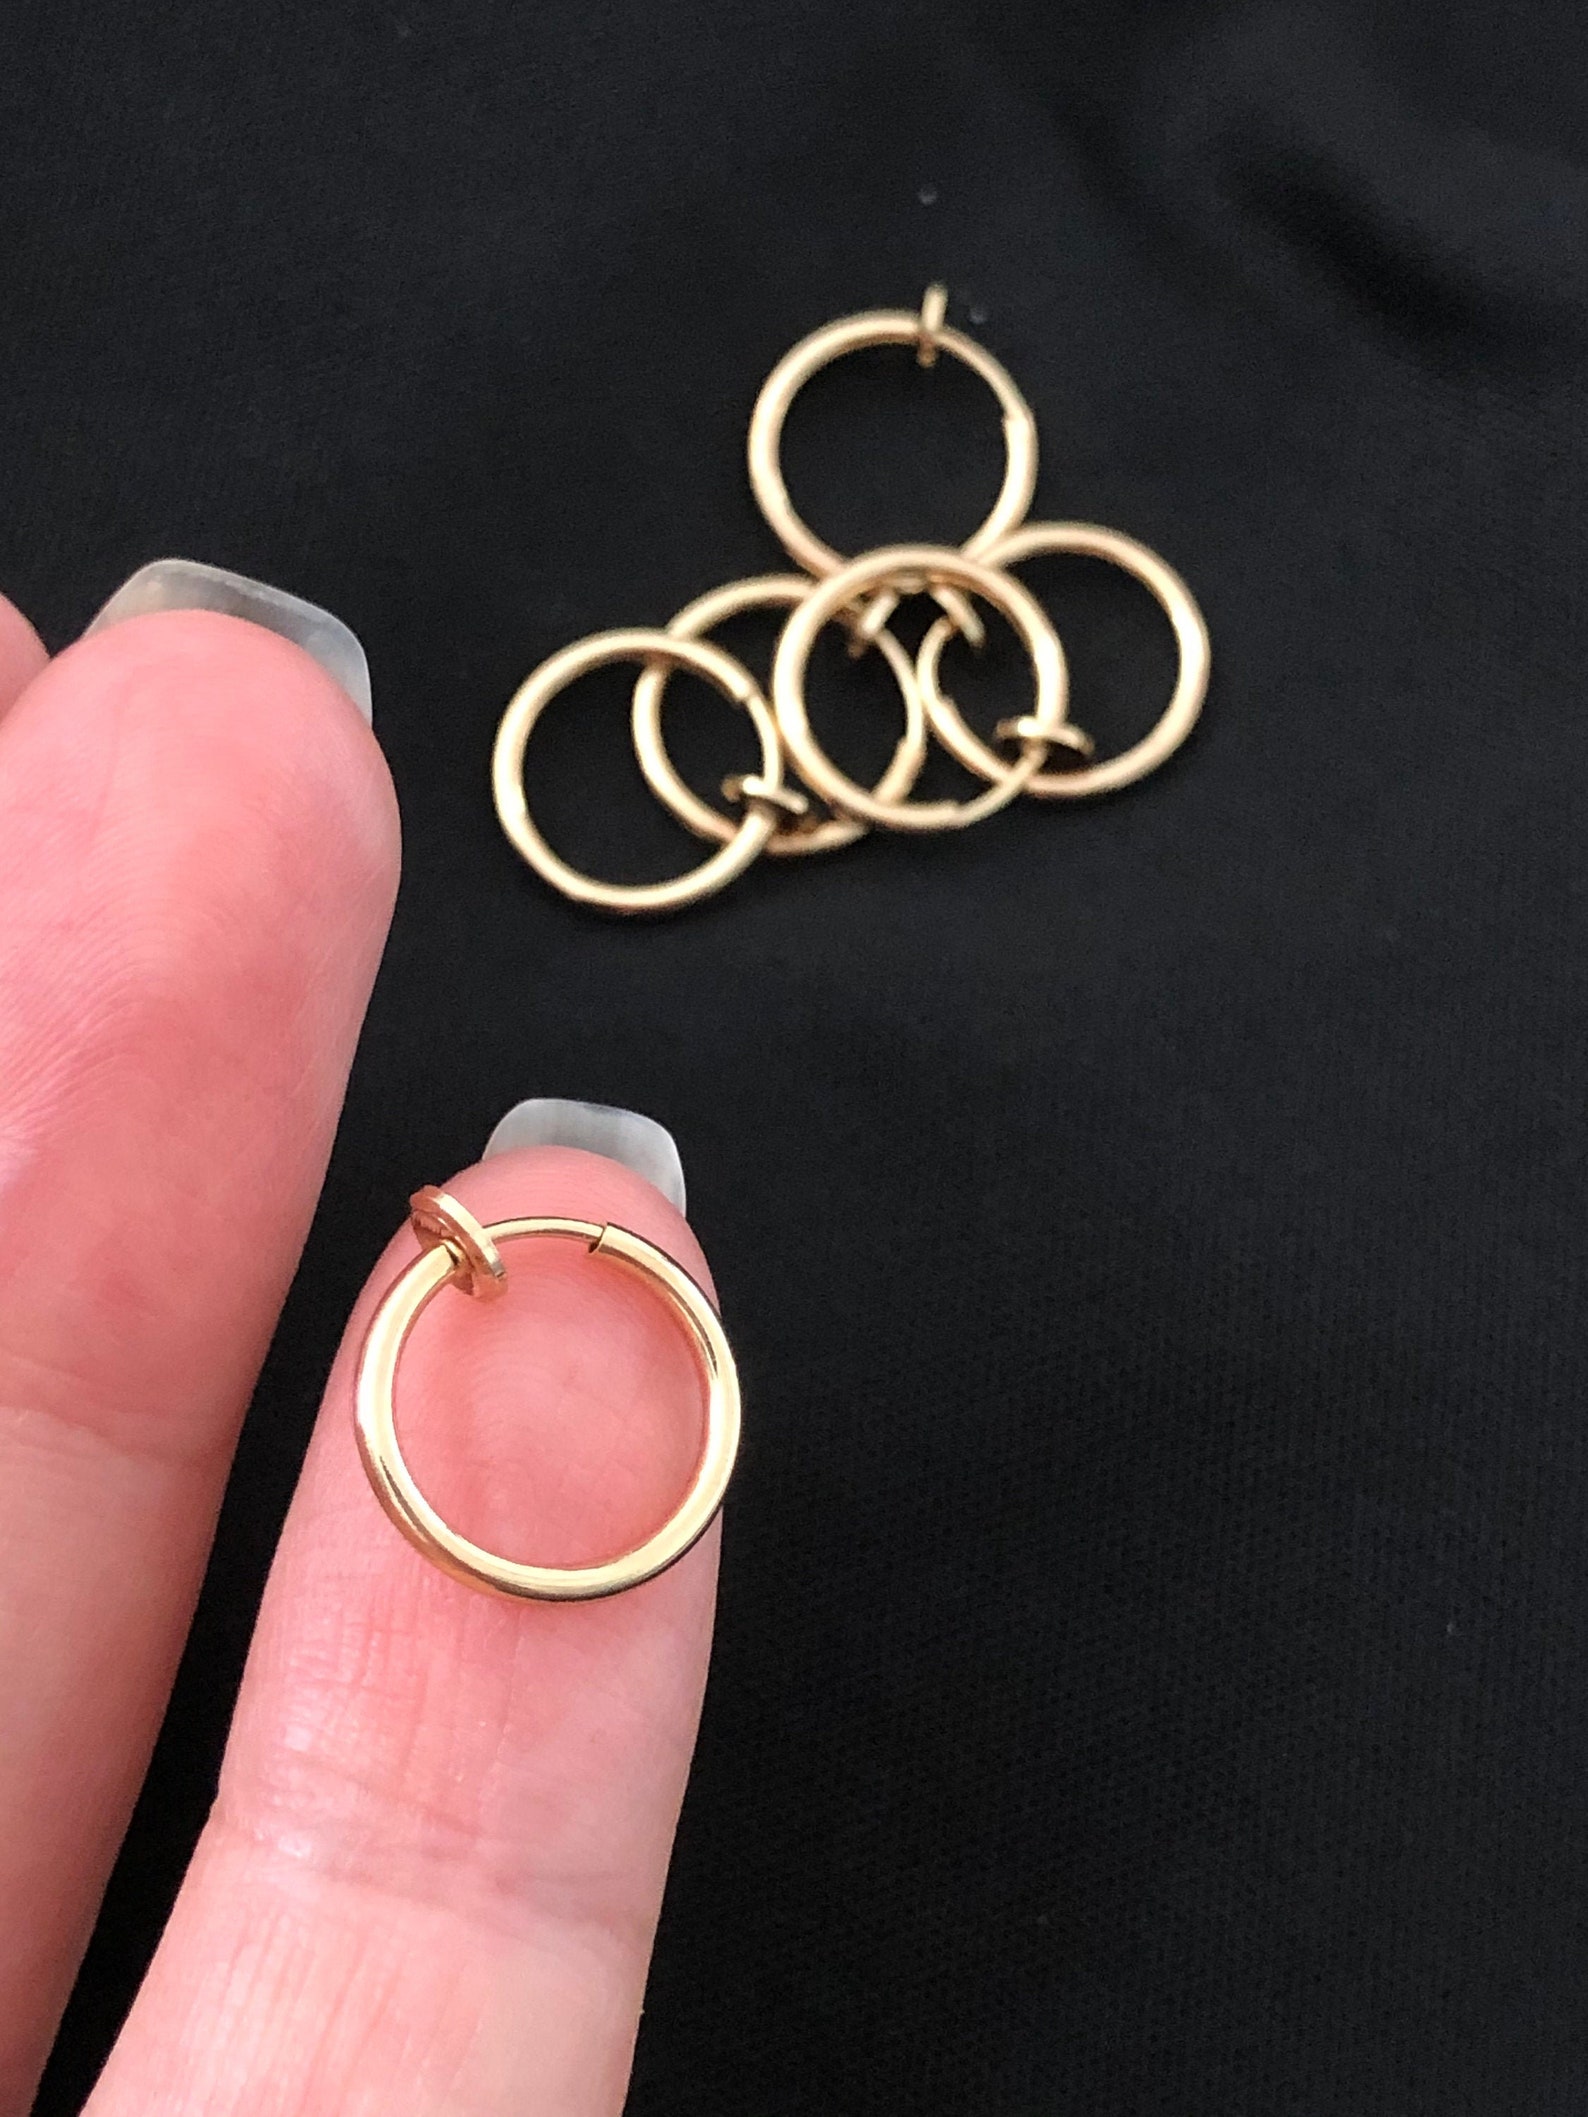 BOGOF Fake Ear/Nose ring Gold or silver retractable clasp Etsy